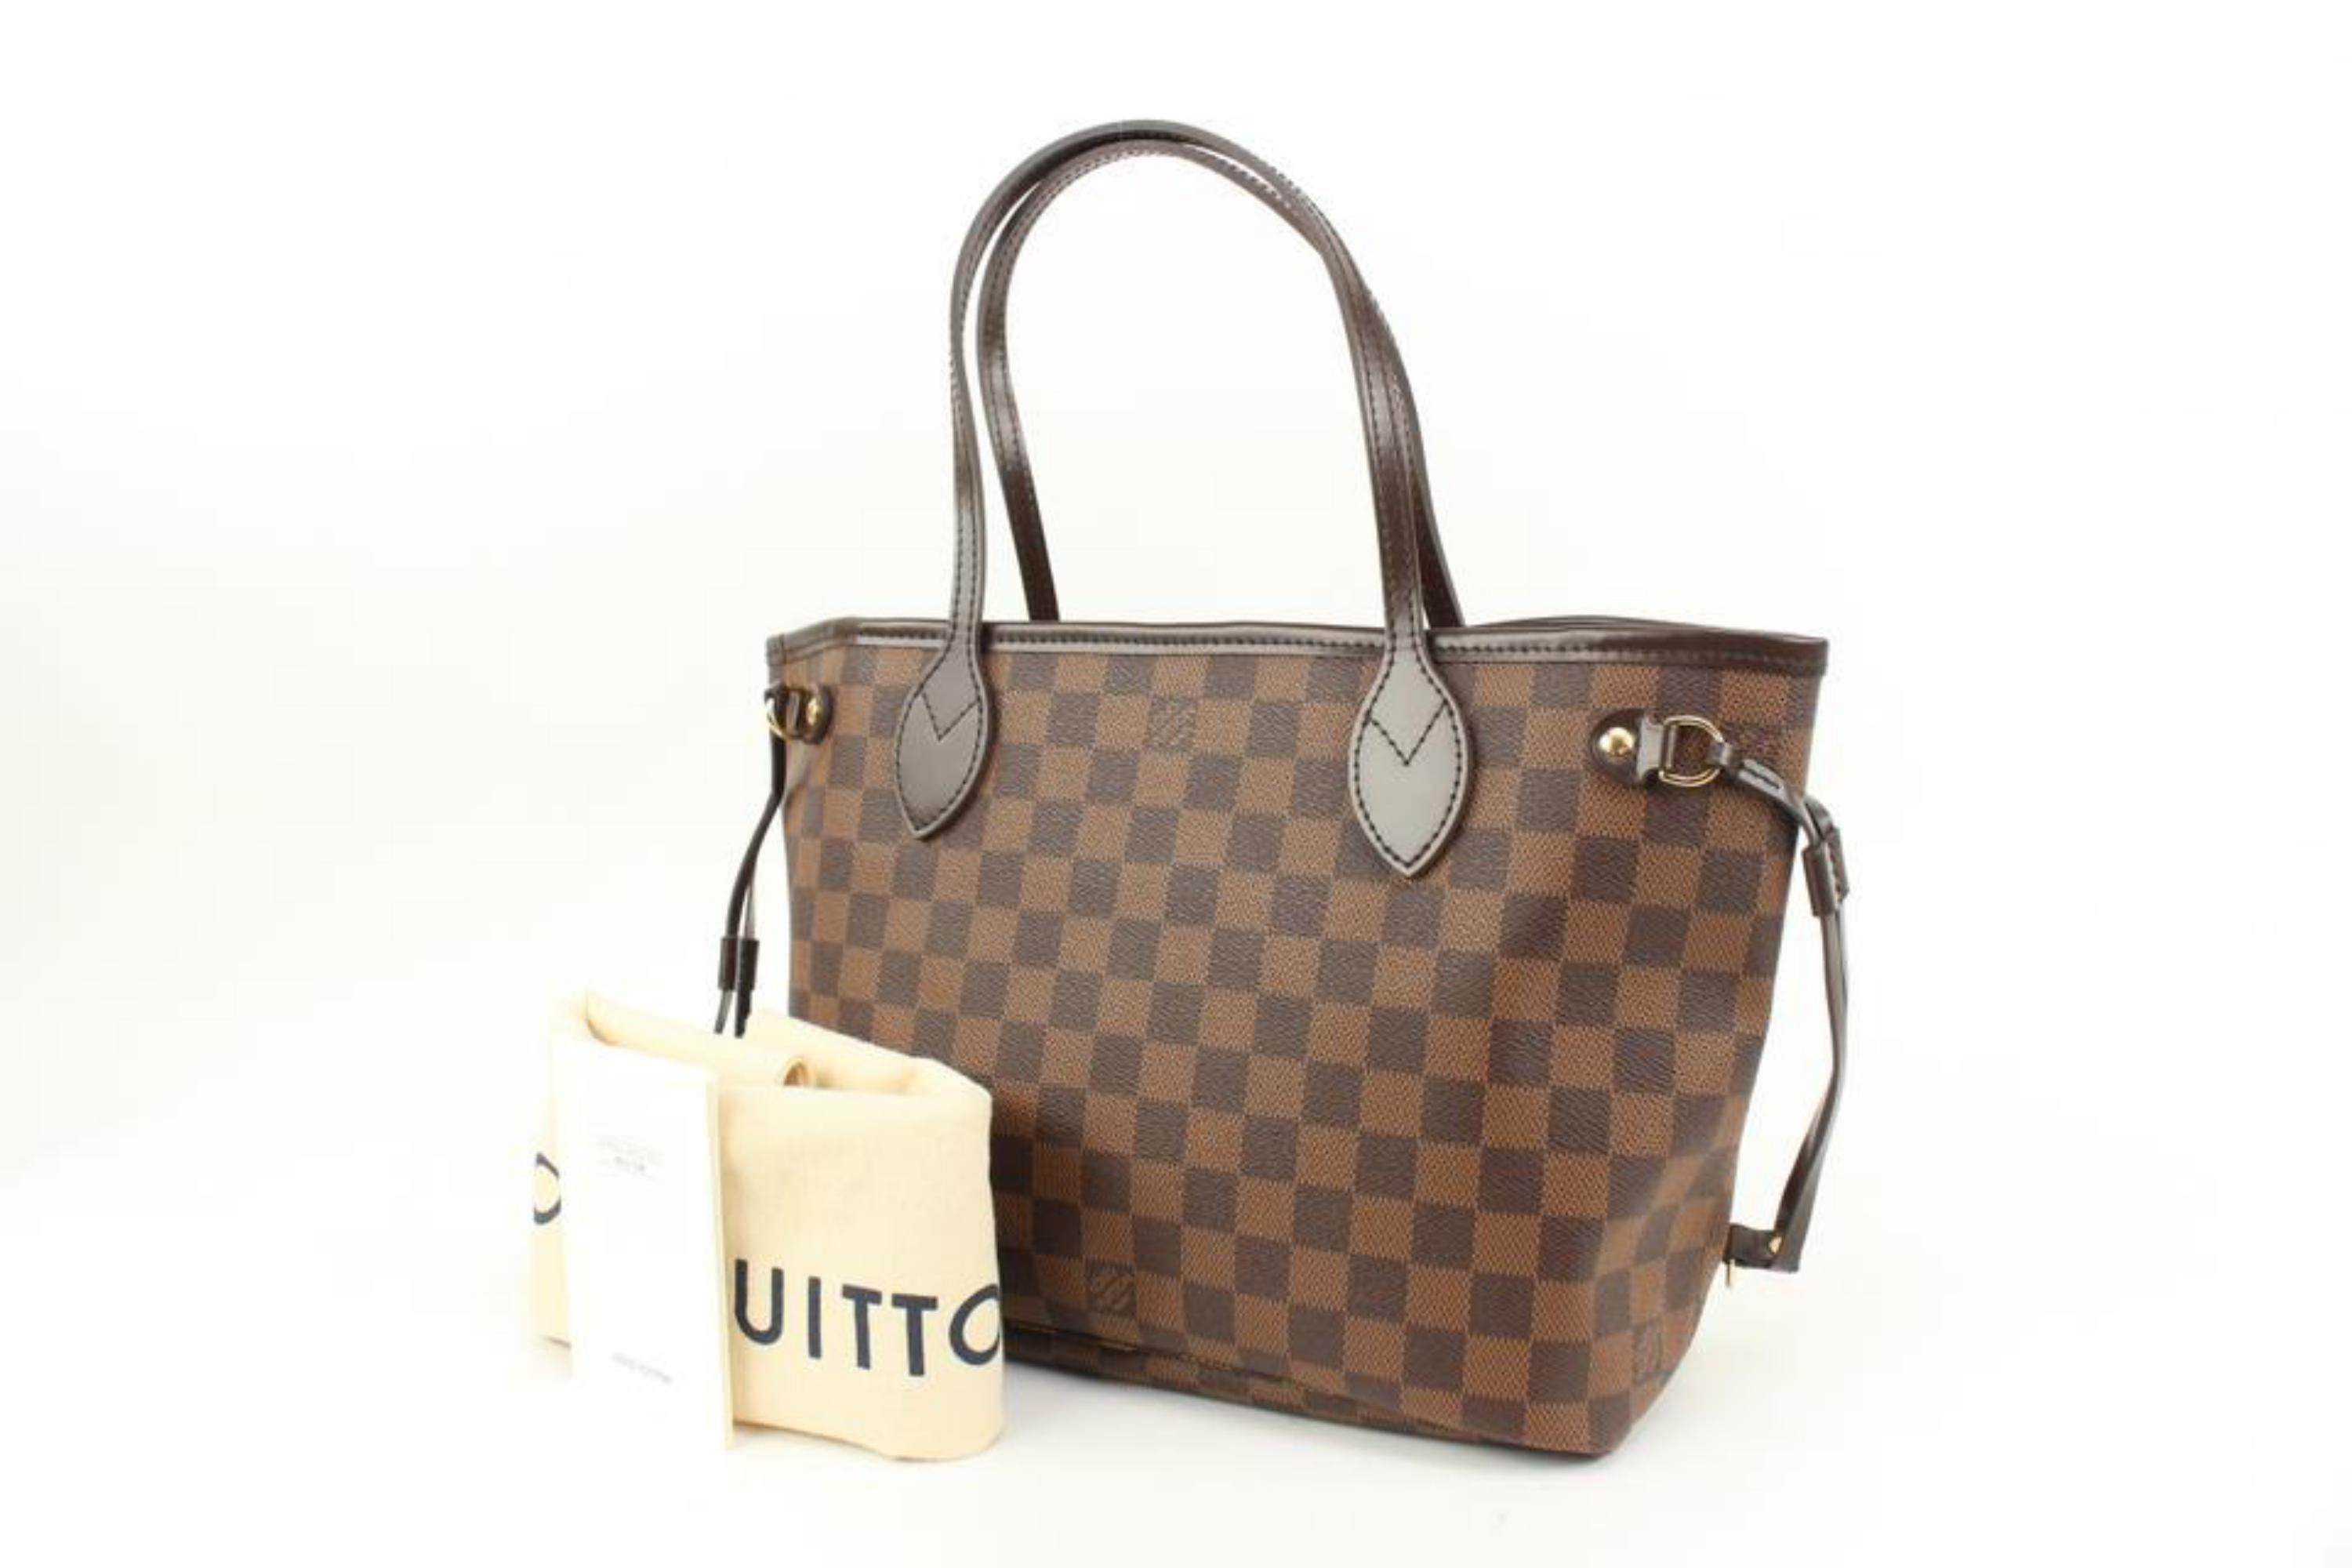 Louis Vuitton Small Damier Ebene Neverfull PM Tote 79lv39s
Date Code/Serial Number: AR3186
Made In: France
Measurements: Length:  14.5